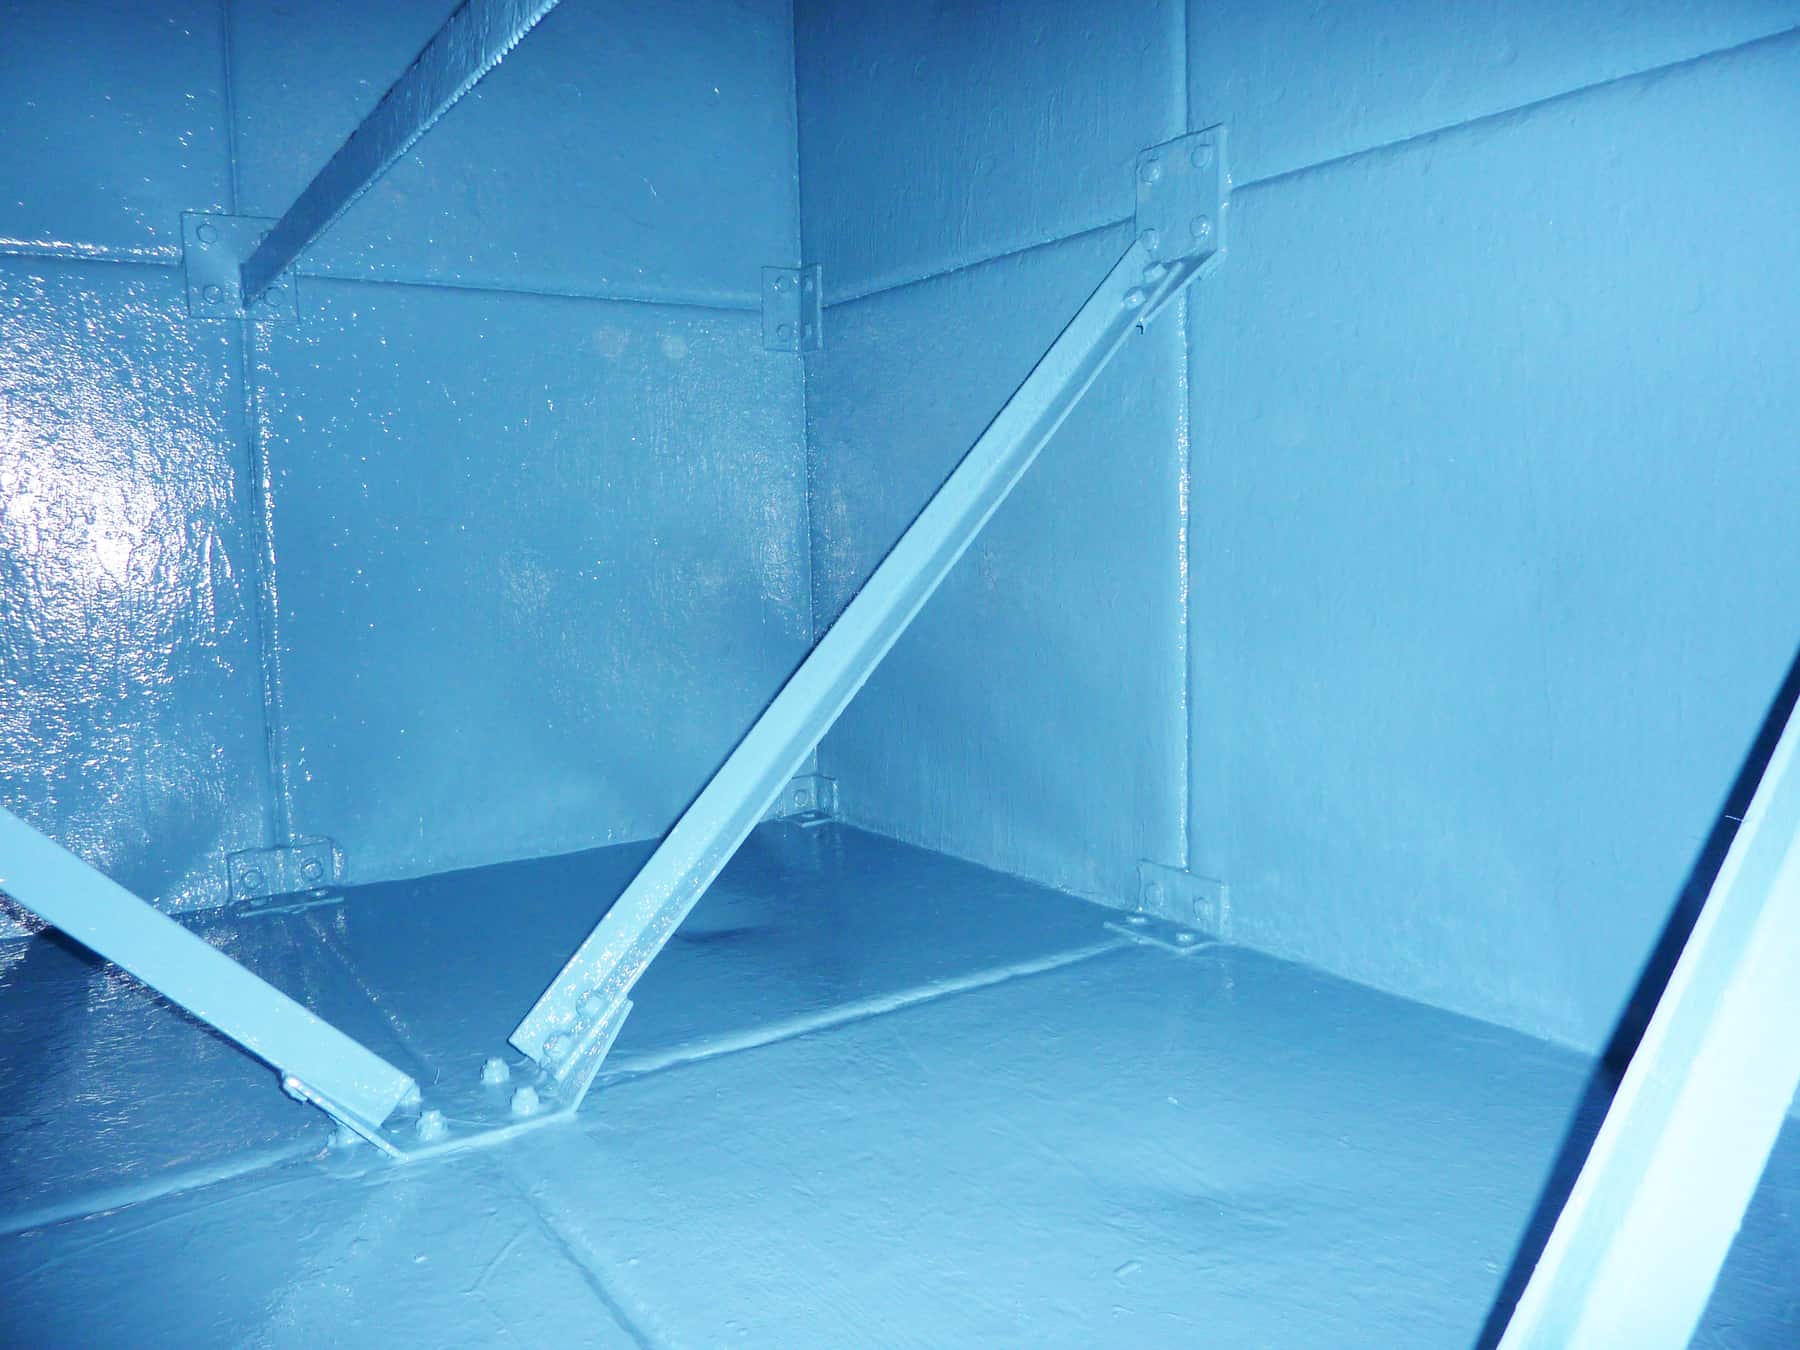 potable water tank internals painted in blue